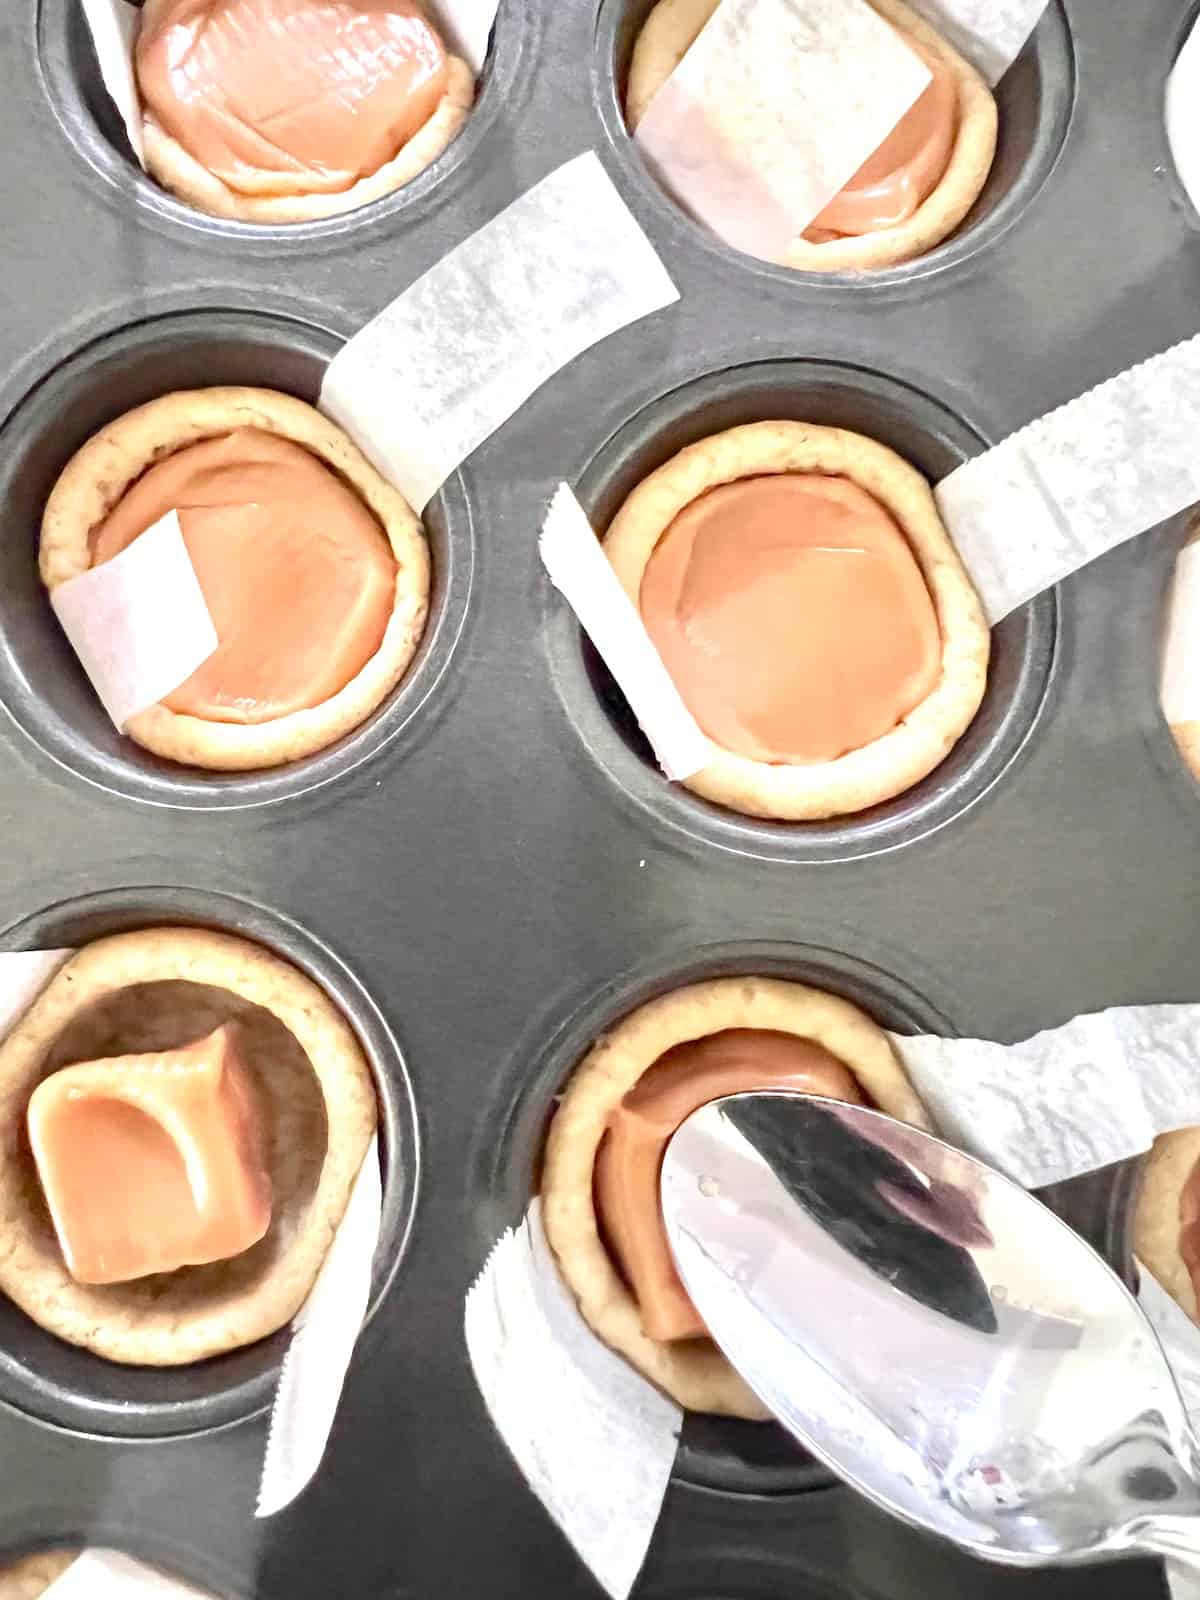 Twix Cookie Cups Using a spoon to press and smooth the soft caramel in the cookie cup